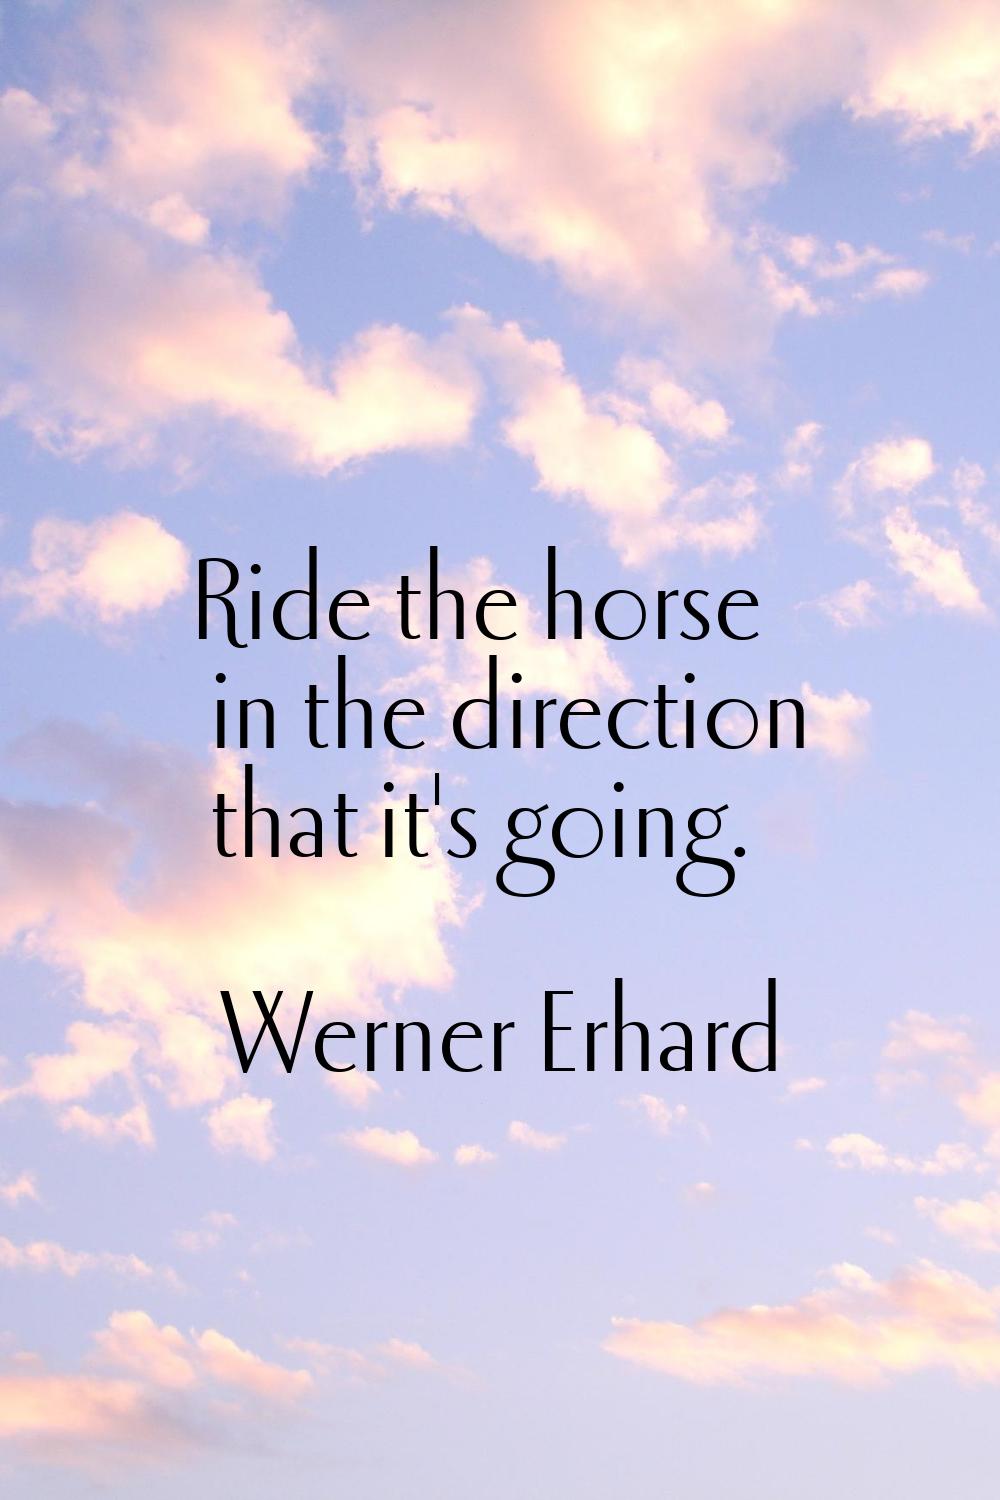 Ride the horse in the direction that it's going.